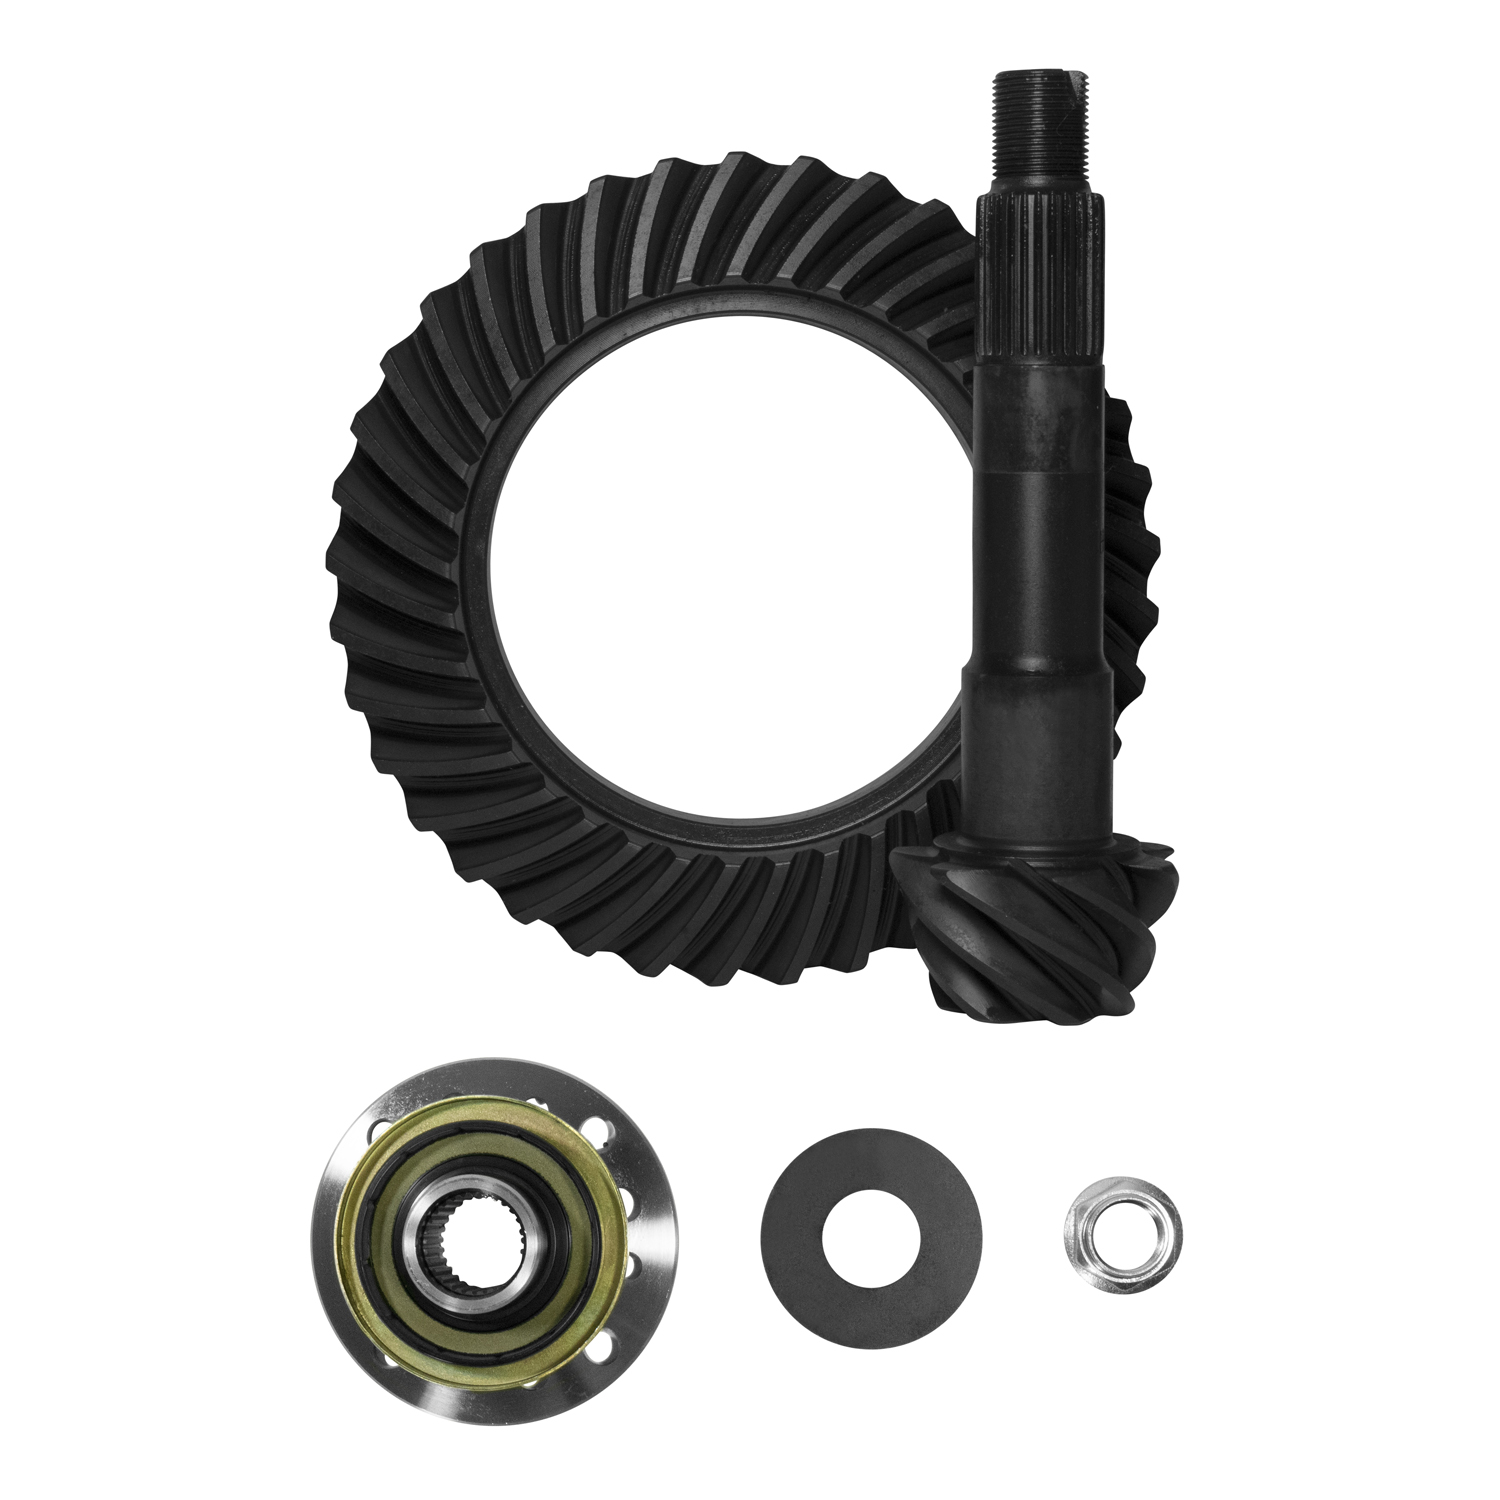 High Performance Ring & Pinion Gear Set For Toyota V6 In A 4.11 Ratio